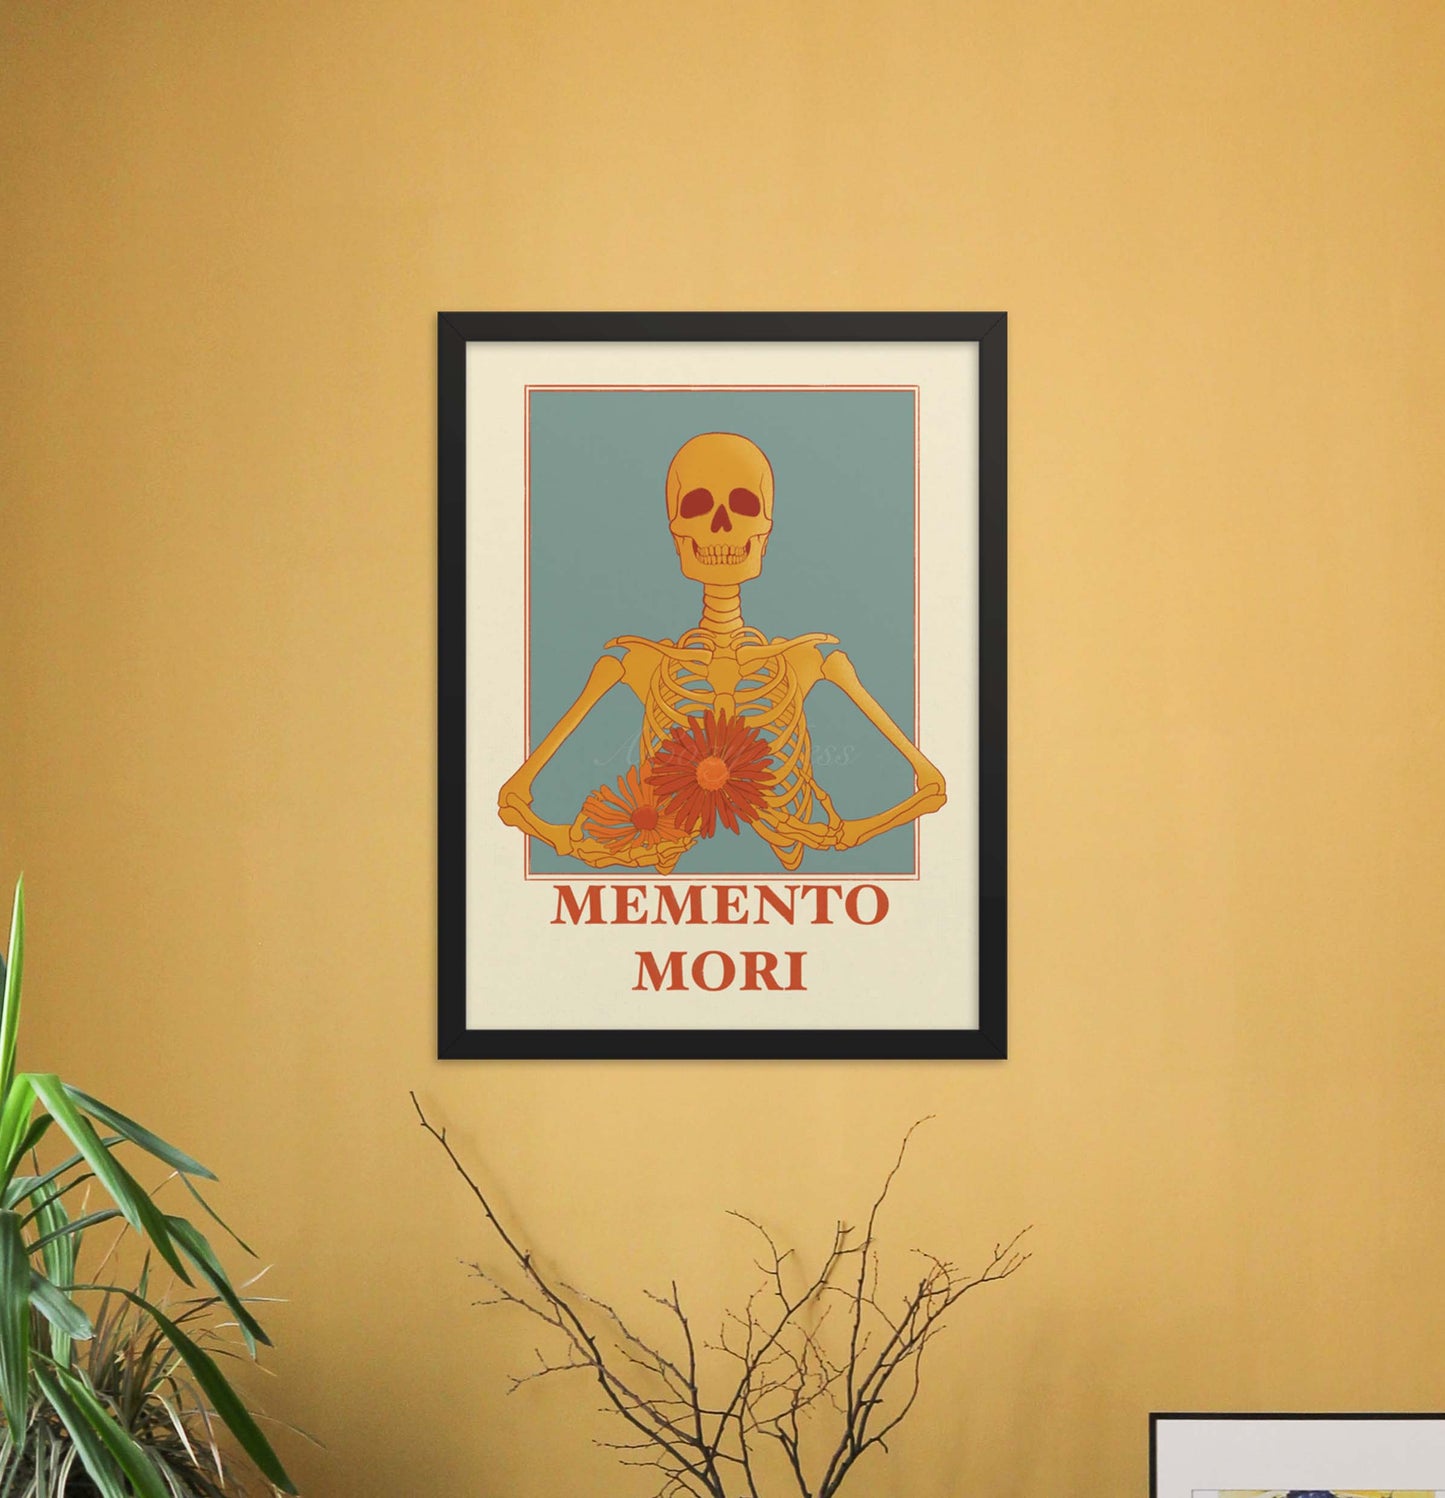 A memento mori art piece in beige blue, yellow & orange hues, featuring a skeleton carrying colorful flowers in black frame